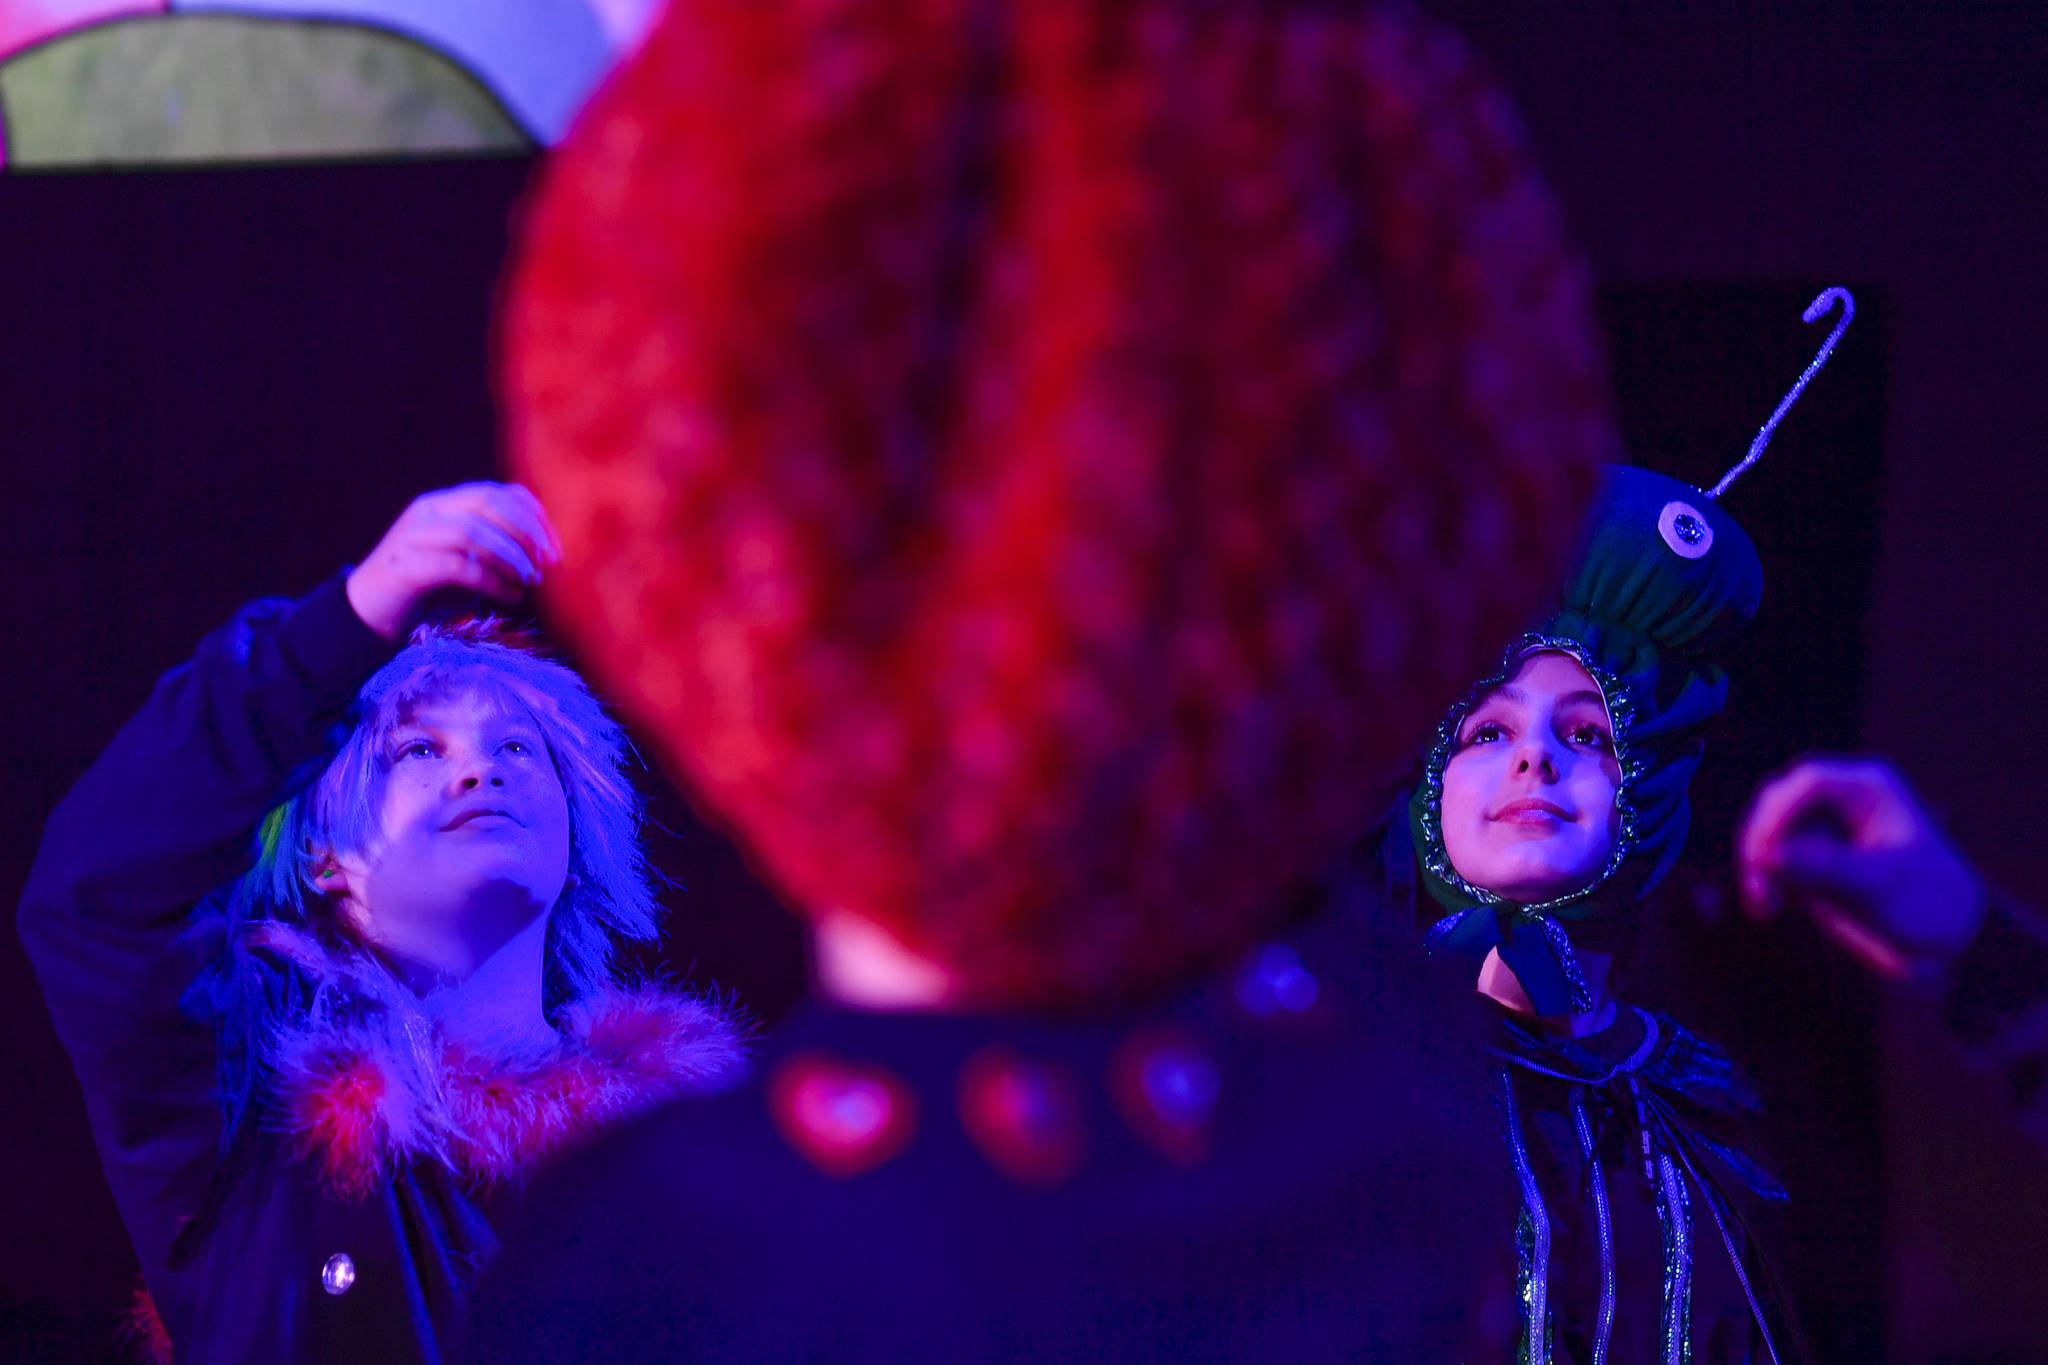 Paige Kirsch, left, and Cadence Ward, as the Caterpillar, perform the Mad Tea Party scene from “DISCO ALICE: The Wonderland Remix” during rehearsal by Perseverance Theatre’s Young Company on Monday, Feb. 25, 2019. (Michael Penn | Juneau Empire)